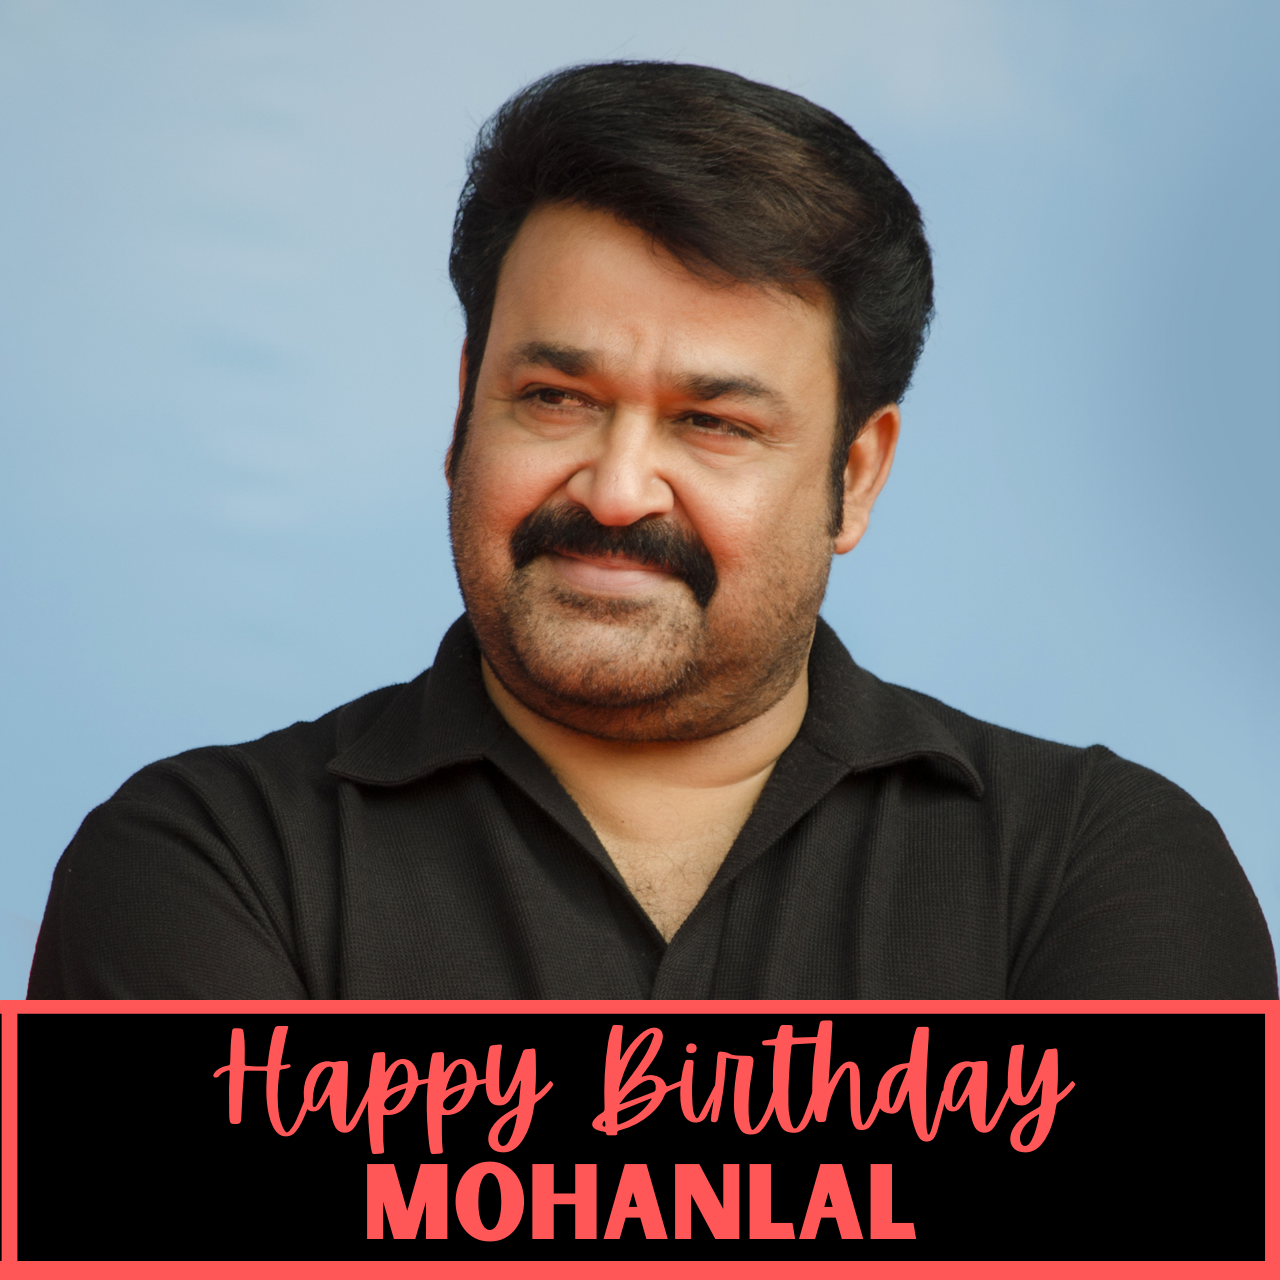 Happy Birthday Mohanlal: Best Wishes, Quotes, Posters, And WhatsApp Status Video To Download